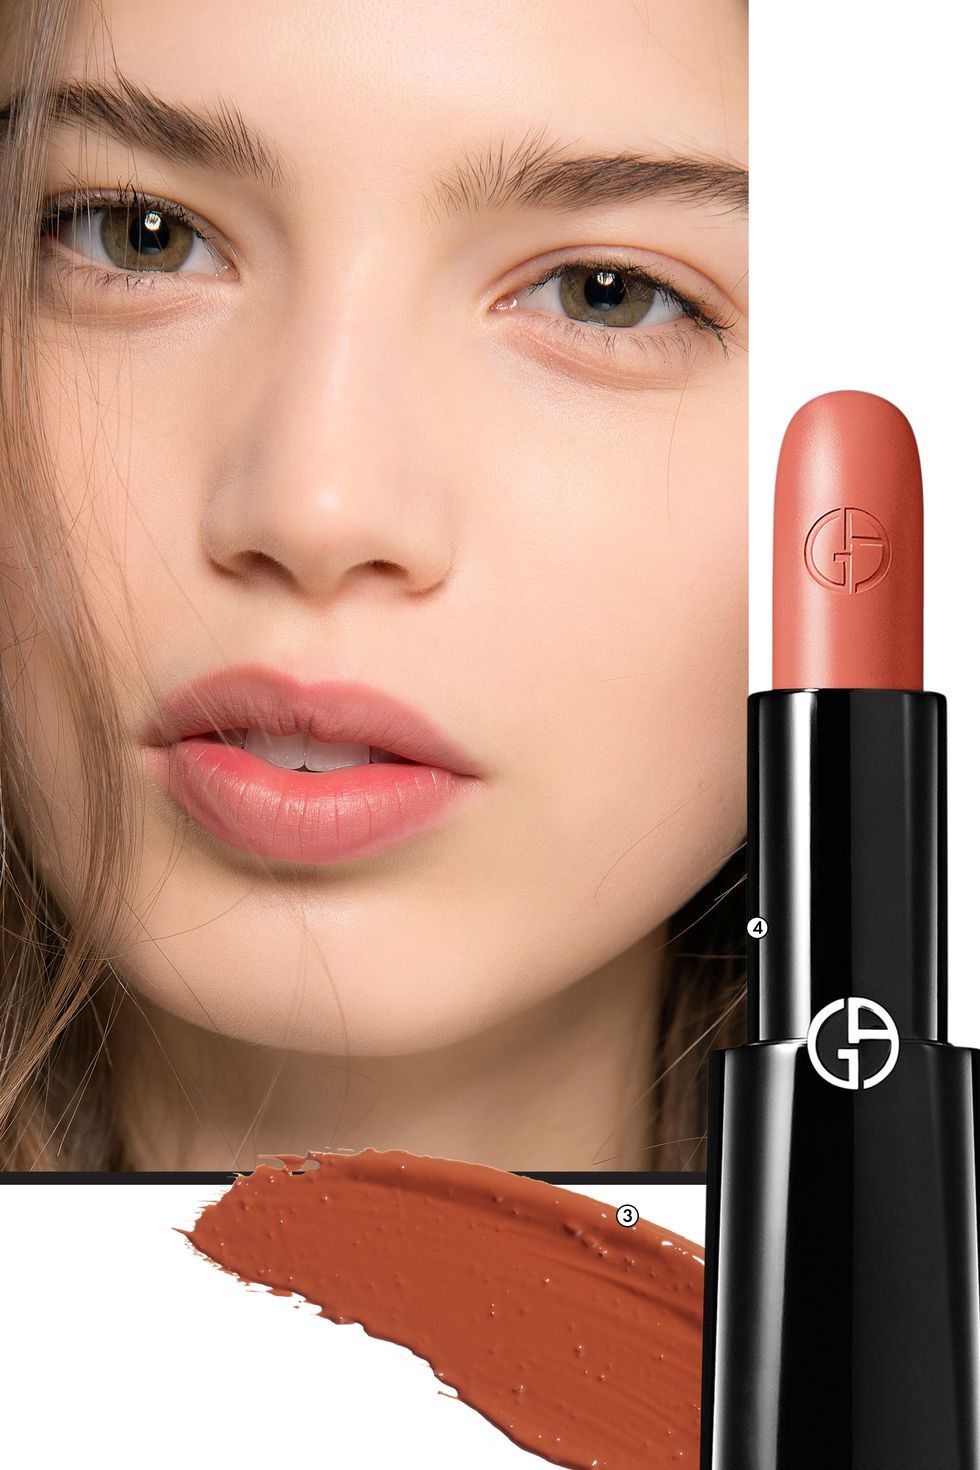 <p>The Alexis Mabille show—in which models' mouths were shaded an intriguing brownish red, the unofficial lipstick color of the '90s—was basically one giant shout-out to the Nirvana era. For fair skin, makeup artist Lloyd Simmonds, using M.A.C Trend Forecast Fall 2017 lip palette (3), mixed a "true beige" with a hint of "dusky rose." To prevent beige undertones from skewing gray on darker complexions, Simmonds advises mixing a rose hue (we like Giorgio Armani Rouge d'Armani Lipstick in Bamboo (4)) with a raspberry shade.<span data-redactor-tag="span" data-verified="redactor"></span></p><p>MAKE WAVES:&nbsp;<em data-redactor-tag="em">Blast hair with a tousle- accentuating finishing spray, such as Redken Wind Blown, before curling or weaving a (mussed) braid.</em></p>